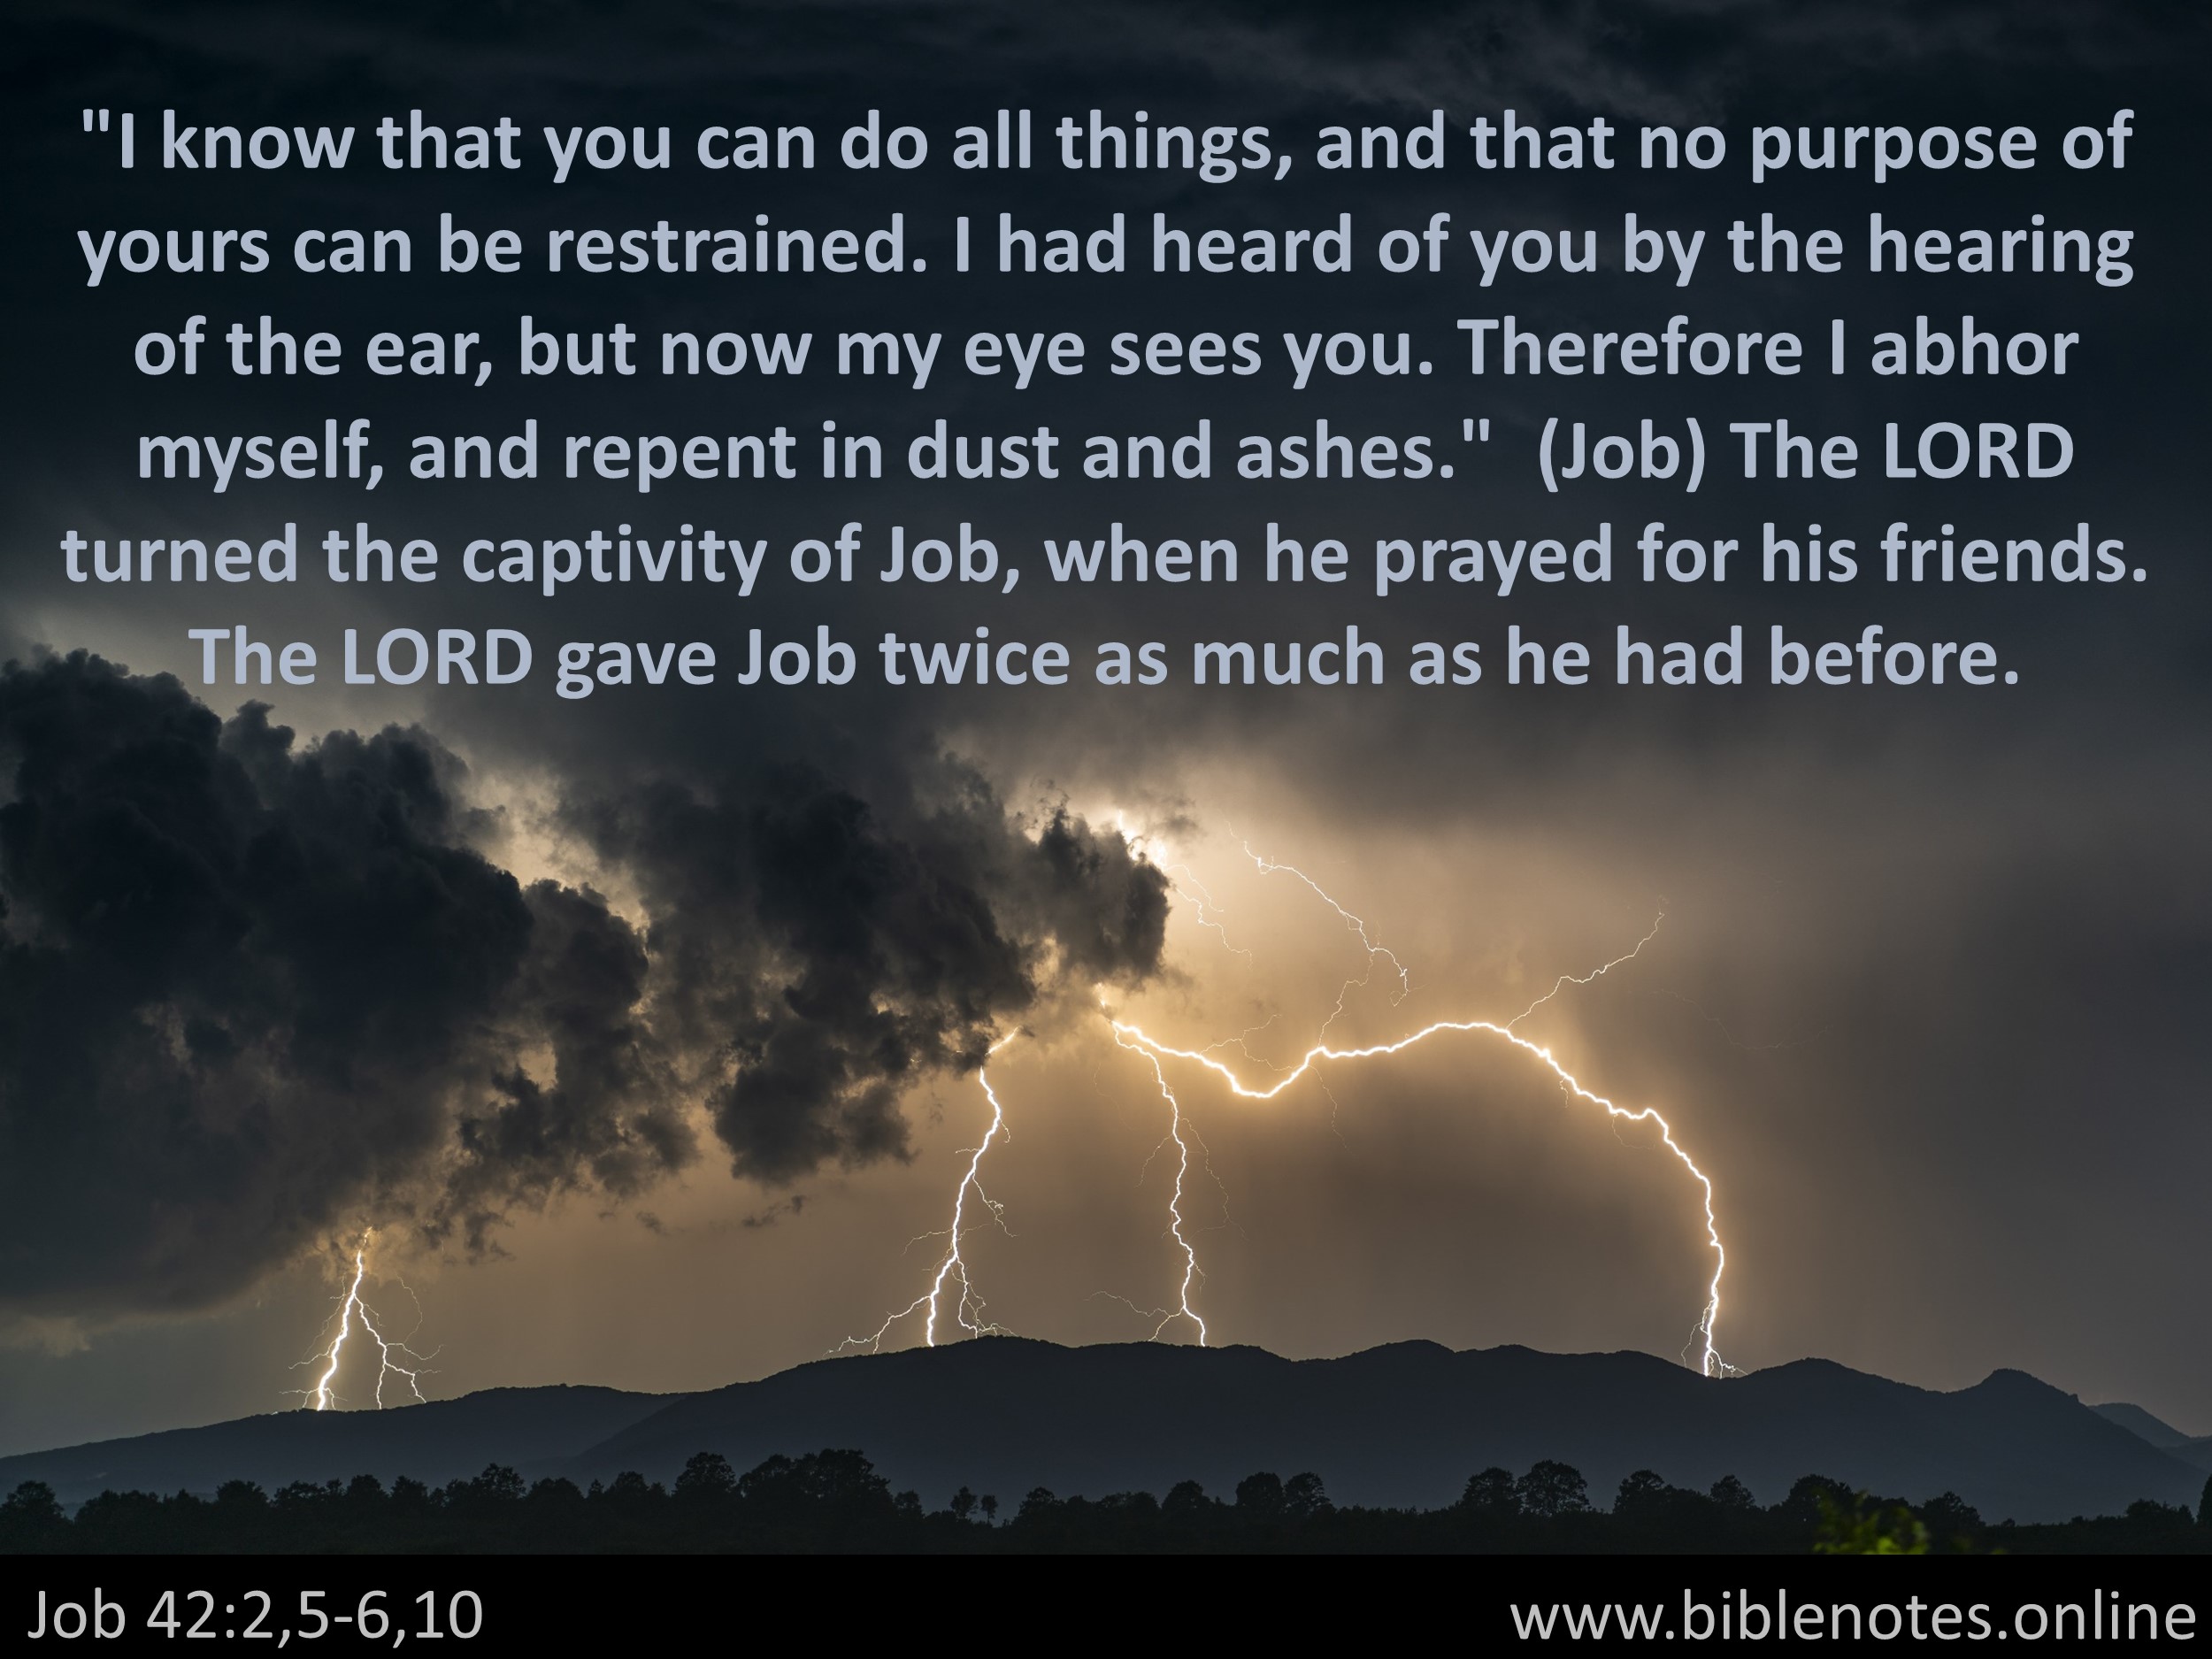 Bible Verse from Job Chapter 42